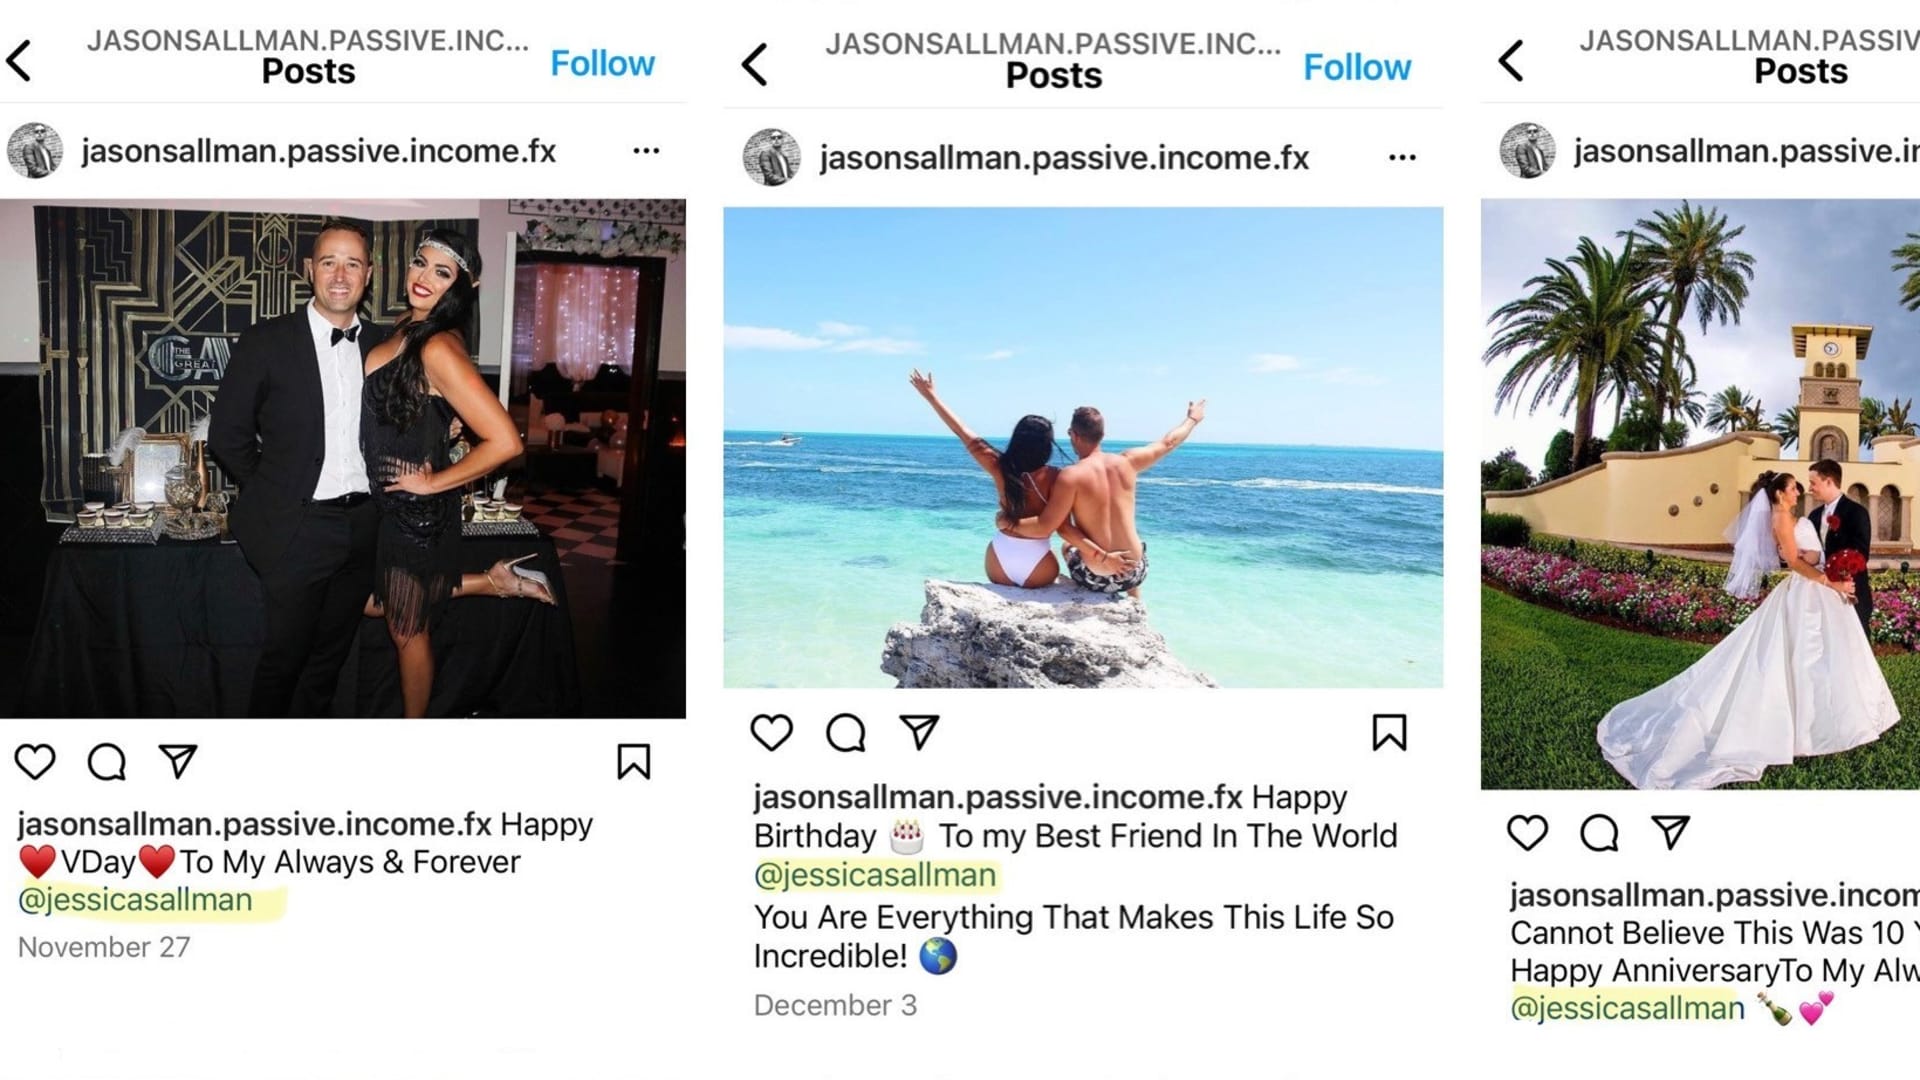 One of Sallman's impersonators @jasonsallman.passive.income.fx has stolen several photos of Sallman with his wife and tagged her in the captions @jessicasallman.